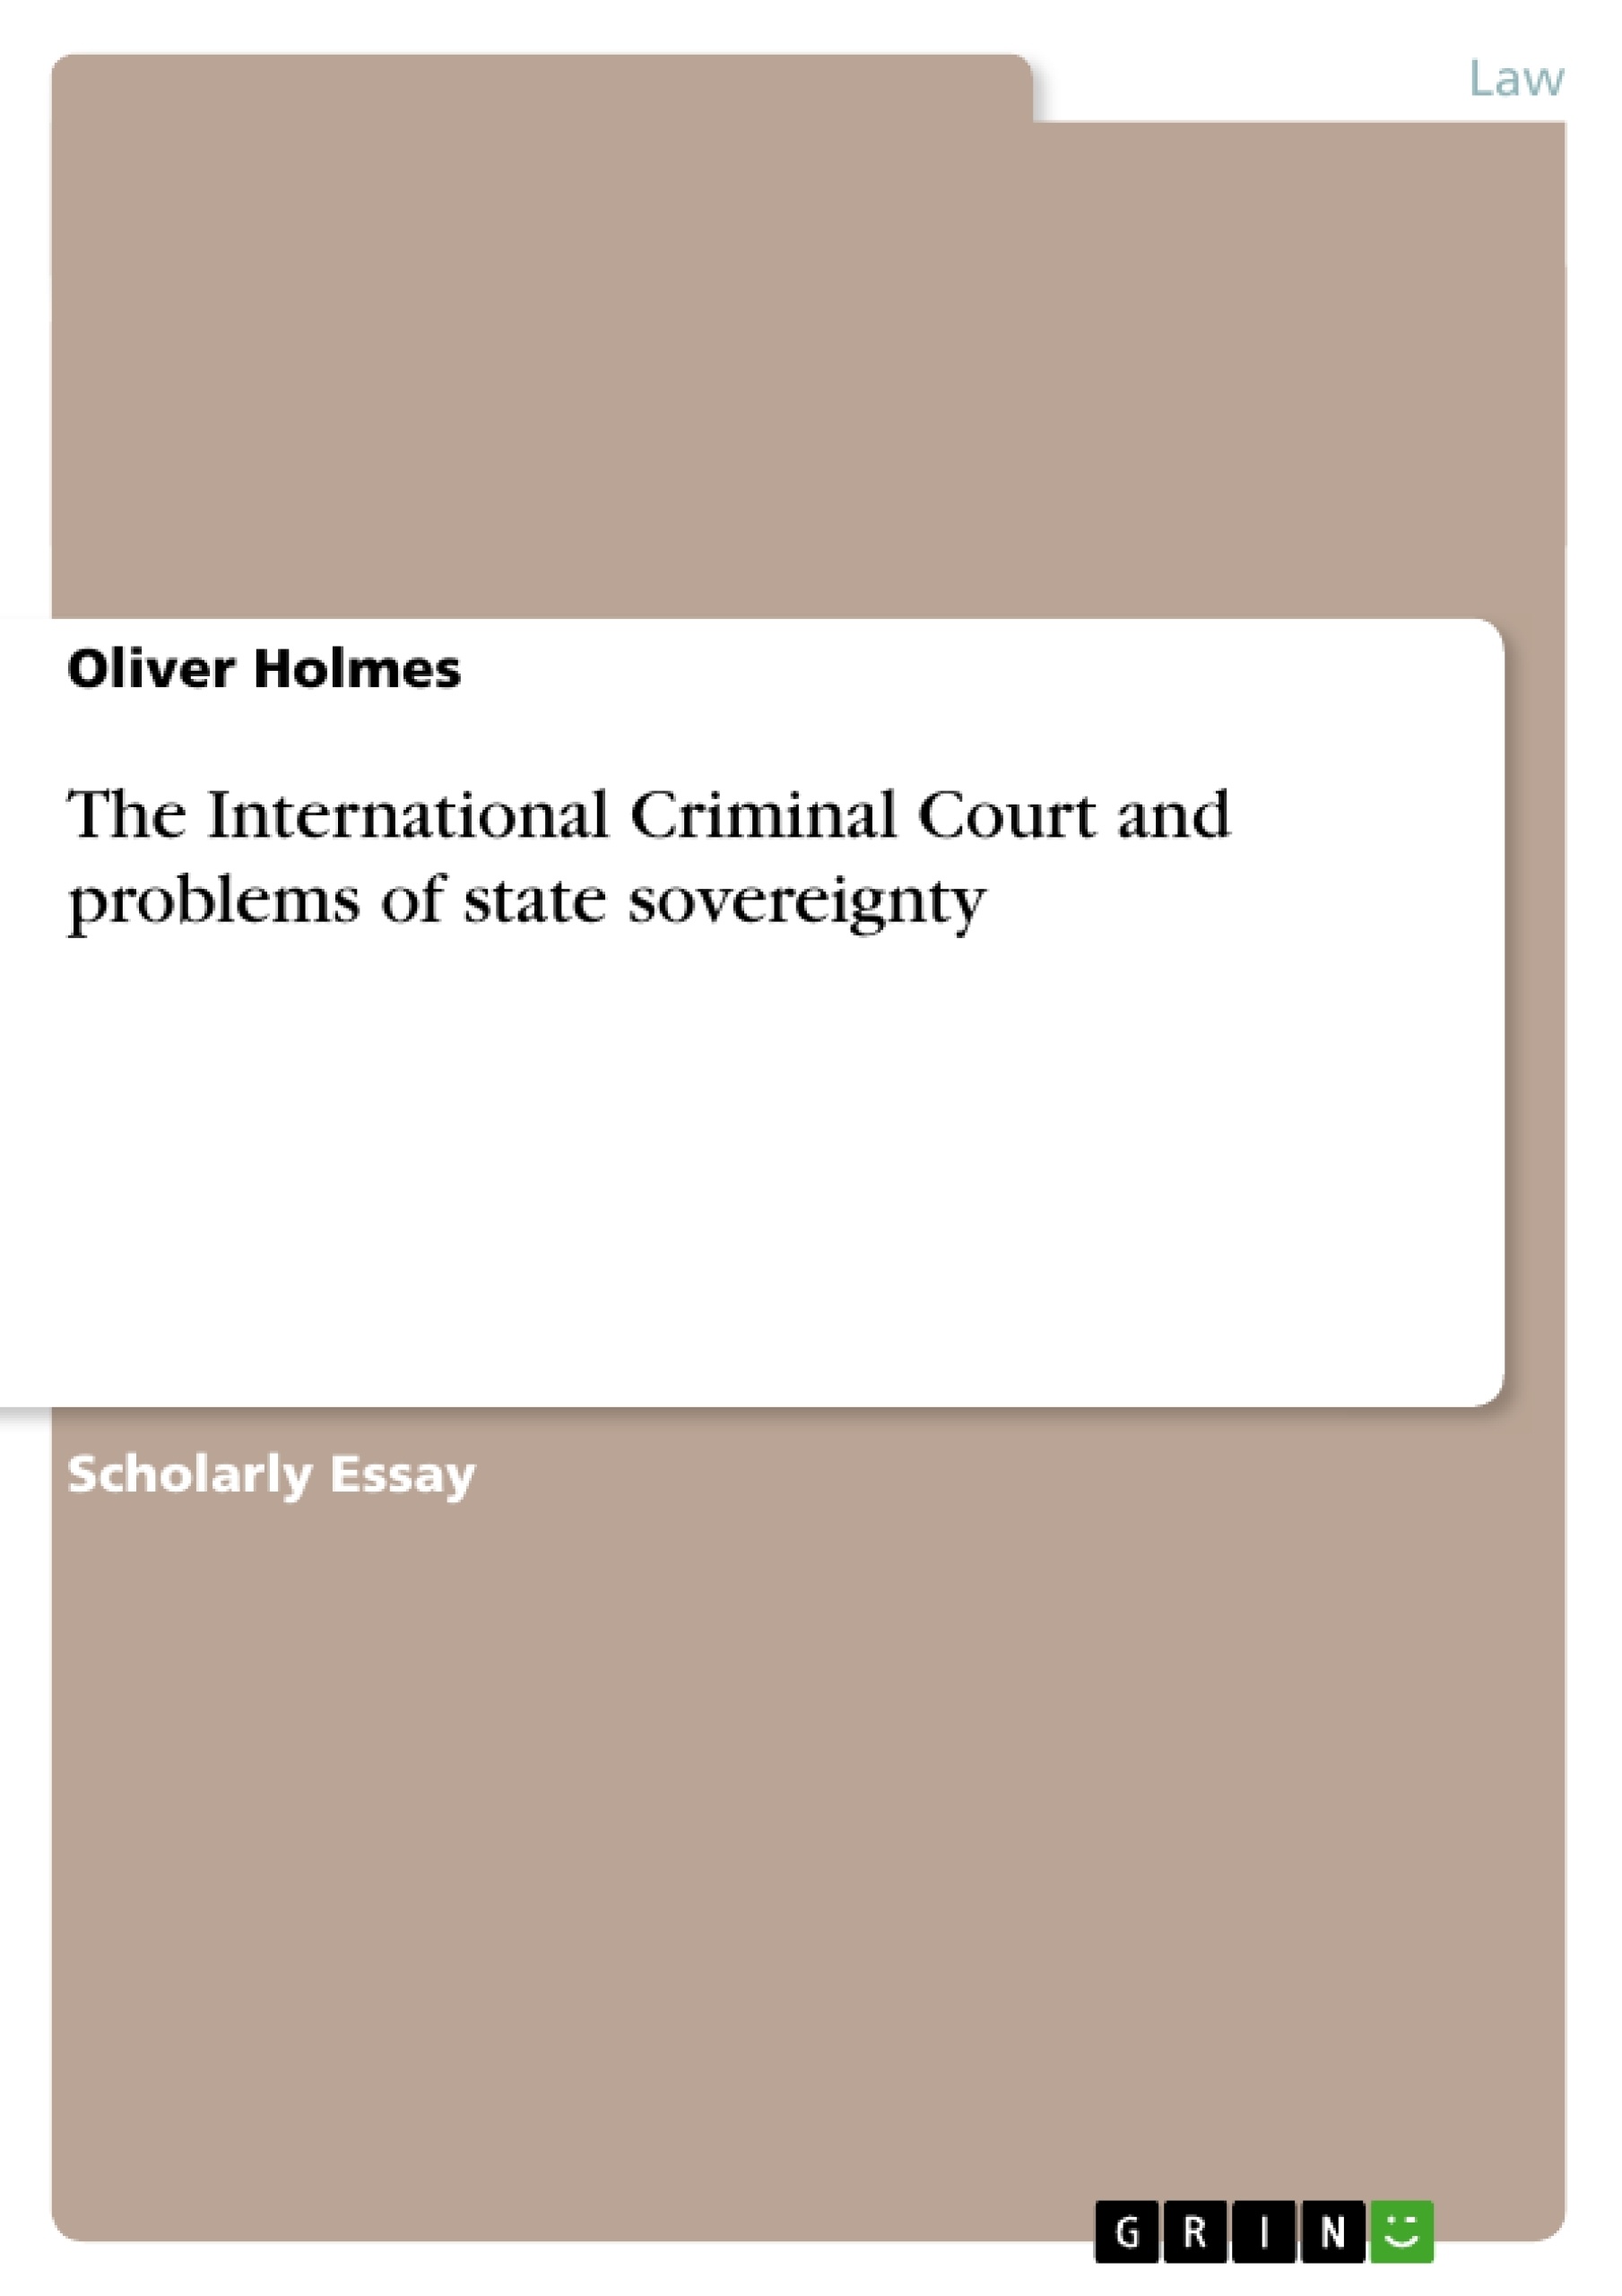 Título: The International Criminal Court and problems of state sovereignty